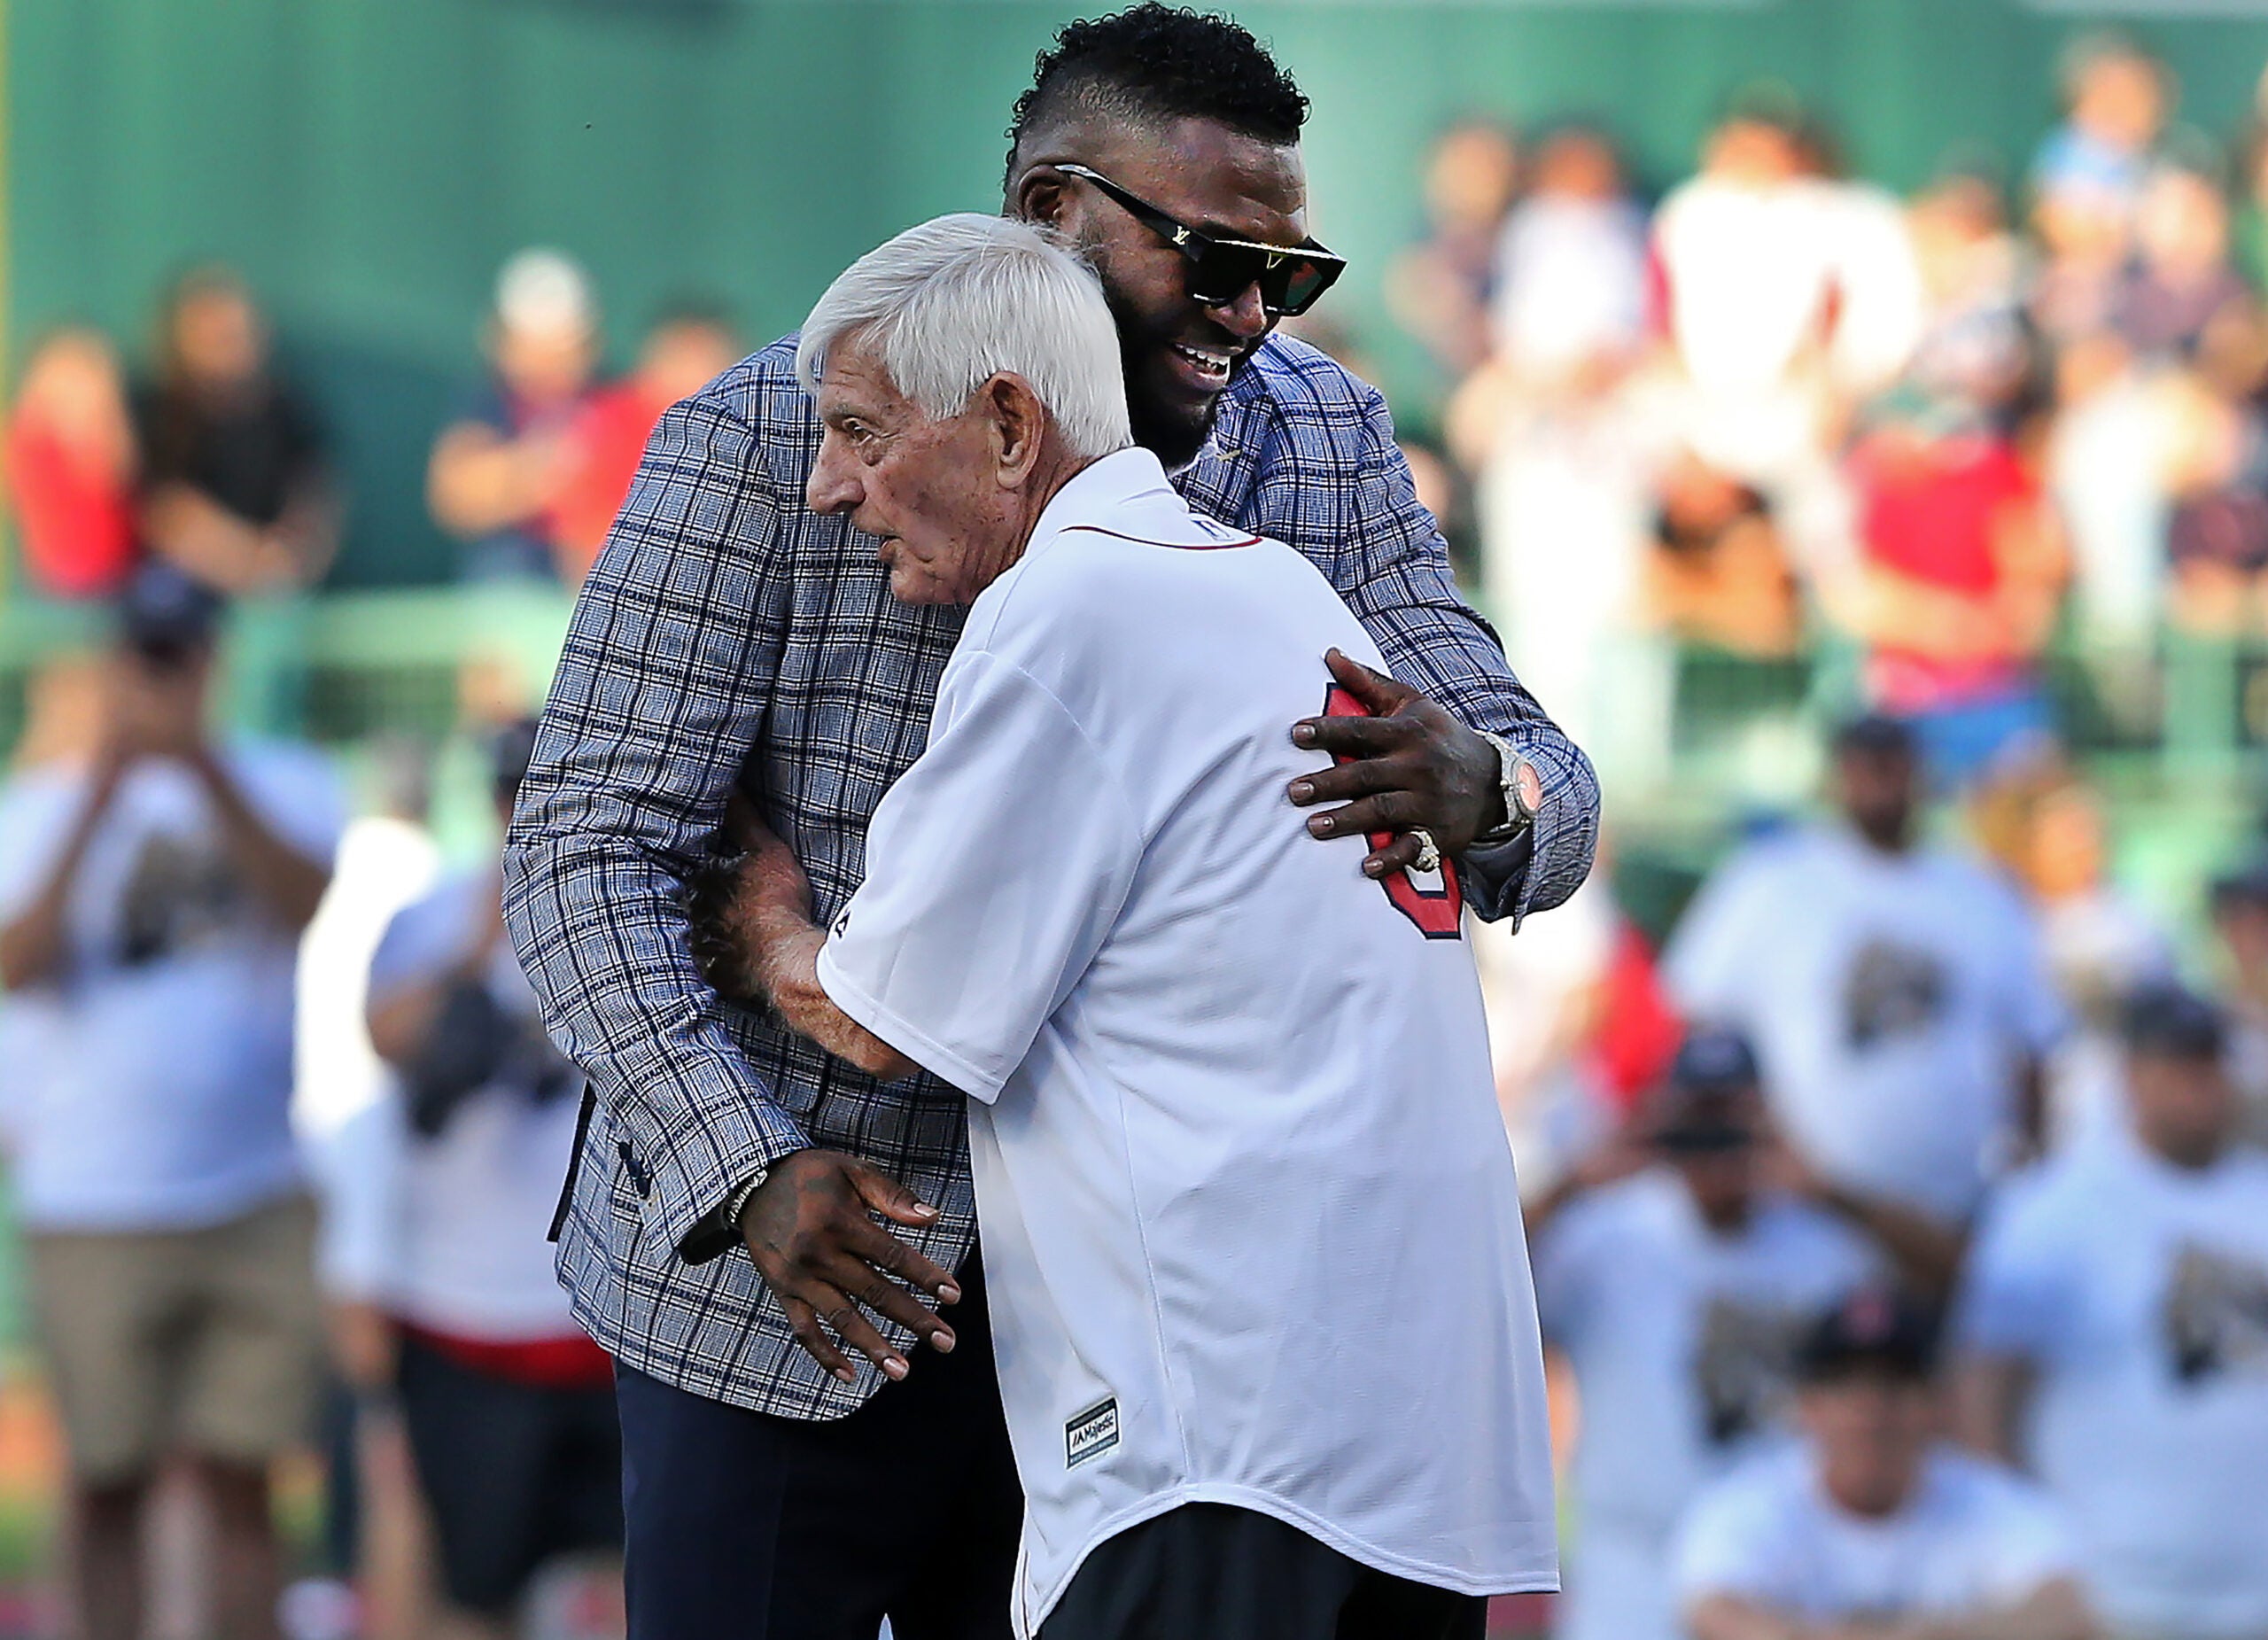 Can You Explain the New Red Sox Home Run Laundry Cart Ritual?